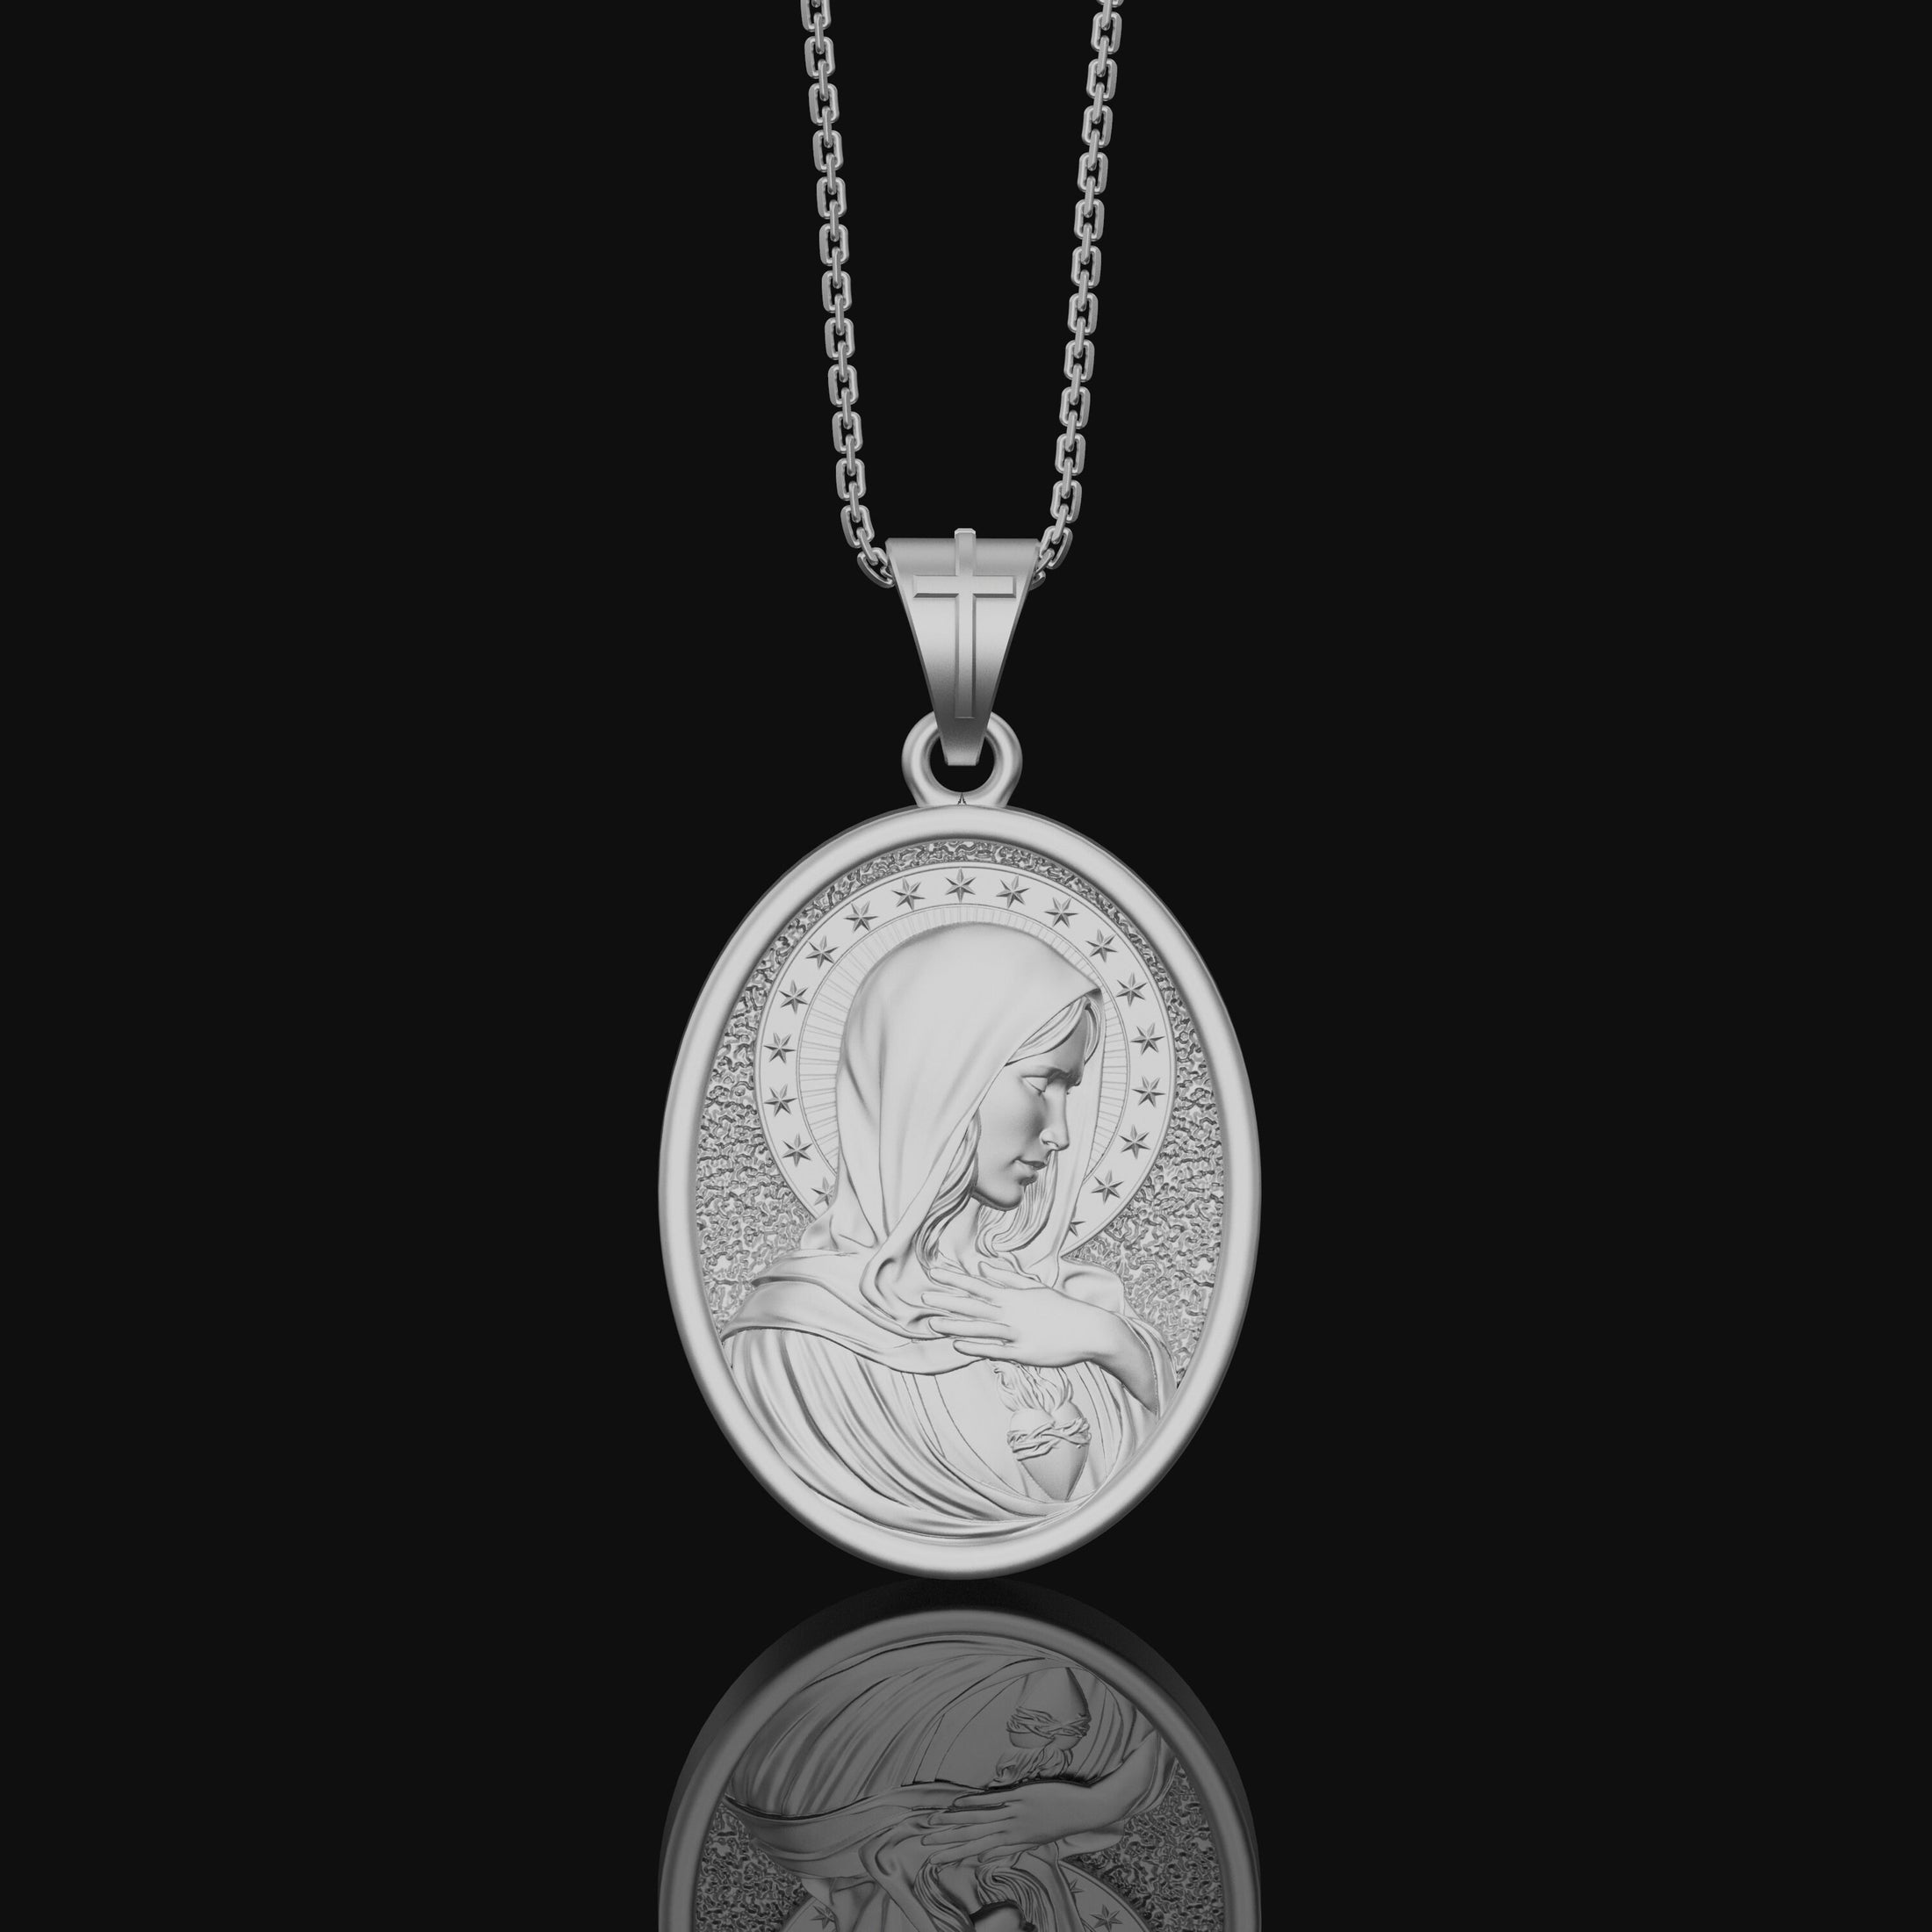 Immaculate Heart, Virgin Mary, Mother Of Jesus, Religious Jewelry, Sacred Heart Medal, Miraculous Medal, Religious Pendant Polished Finish